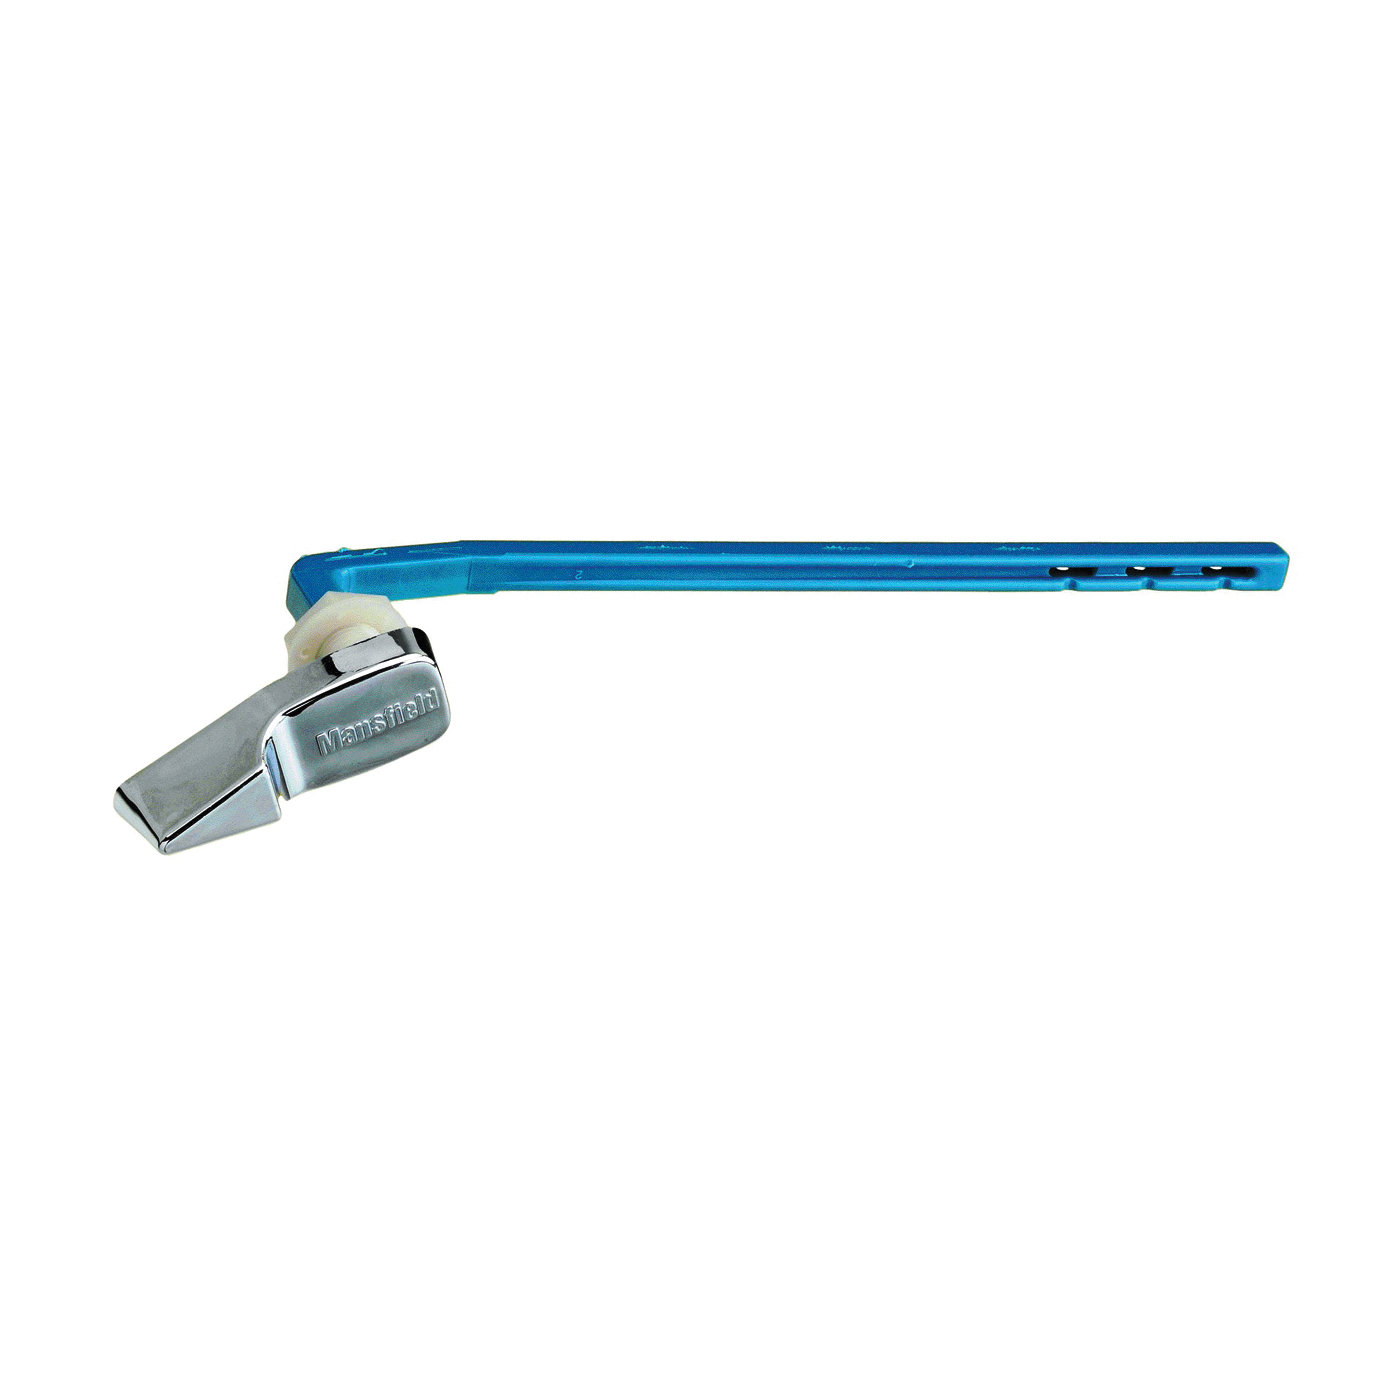 PP836-32 Toilet Flush Lever, For: Mansfield #35 and 51 Toilet Tank